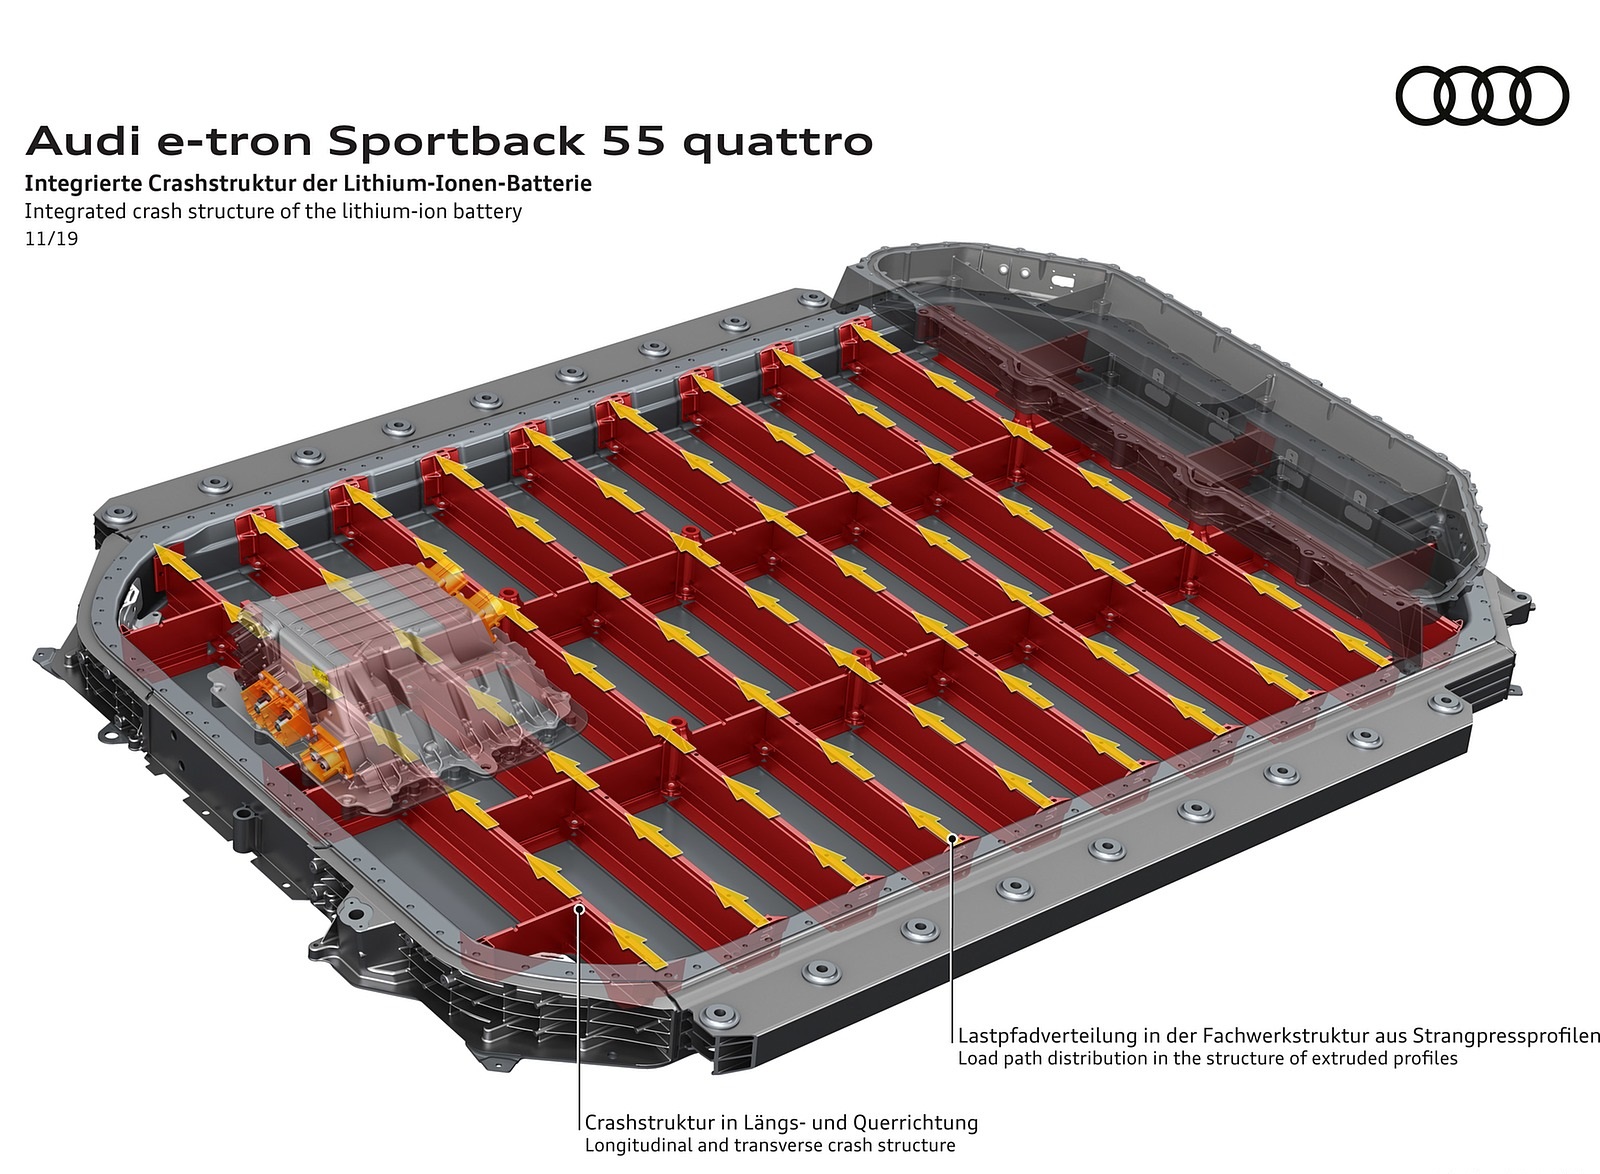 2020 Audi e-tron Sportback Integrated crash structure of the lithium-ion battery Wallpapers #135 of 145